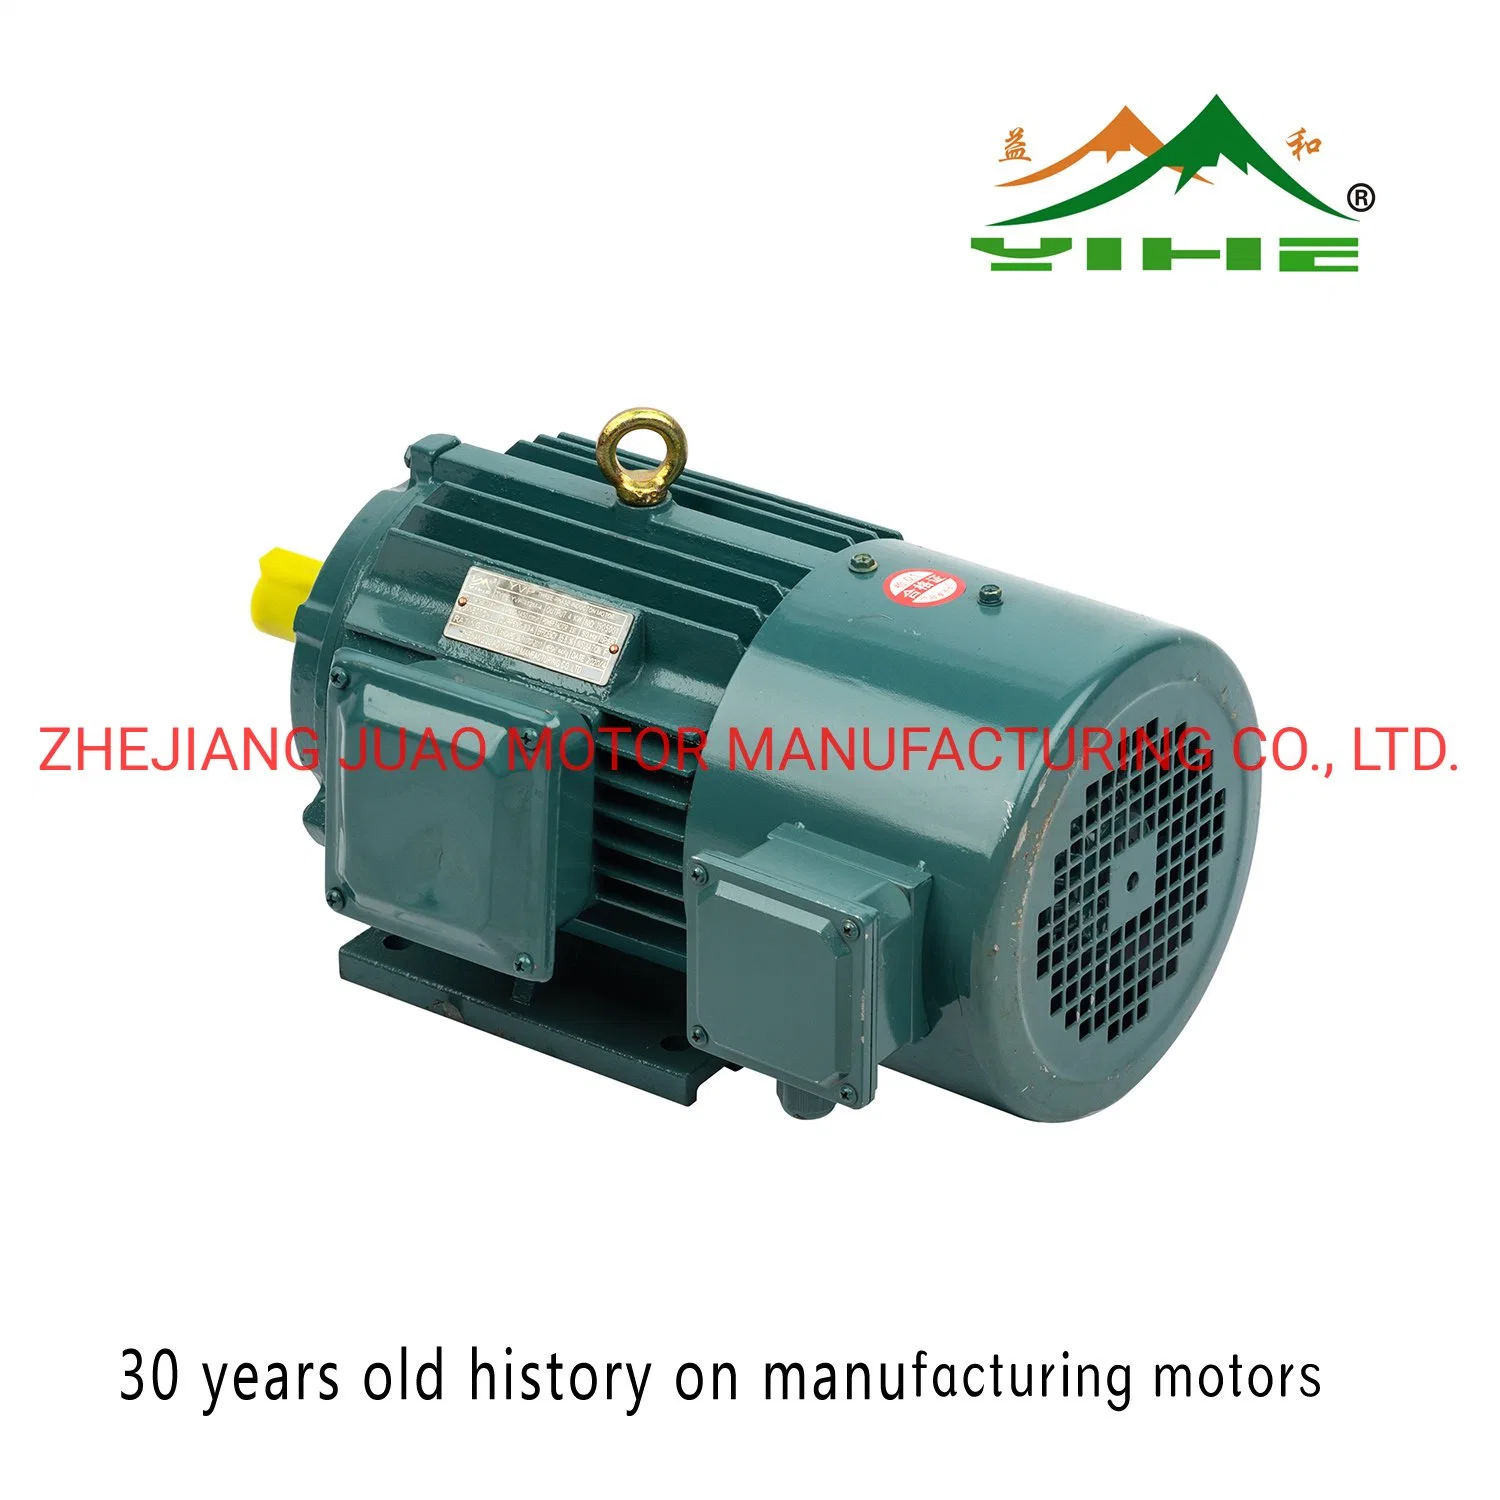 Yvp Series Frequency Control Variable and Speed Adjustable Induction Electrical Motor 2.2kw